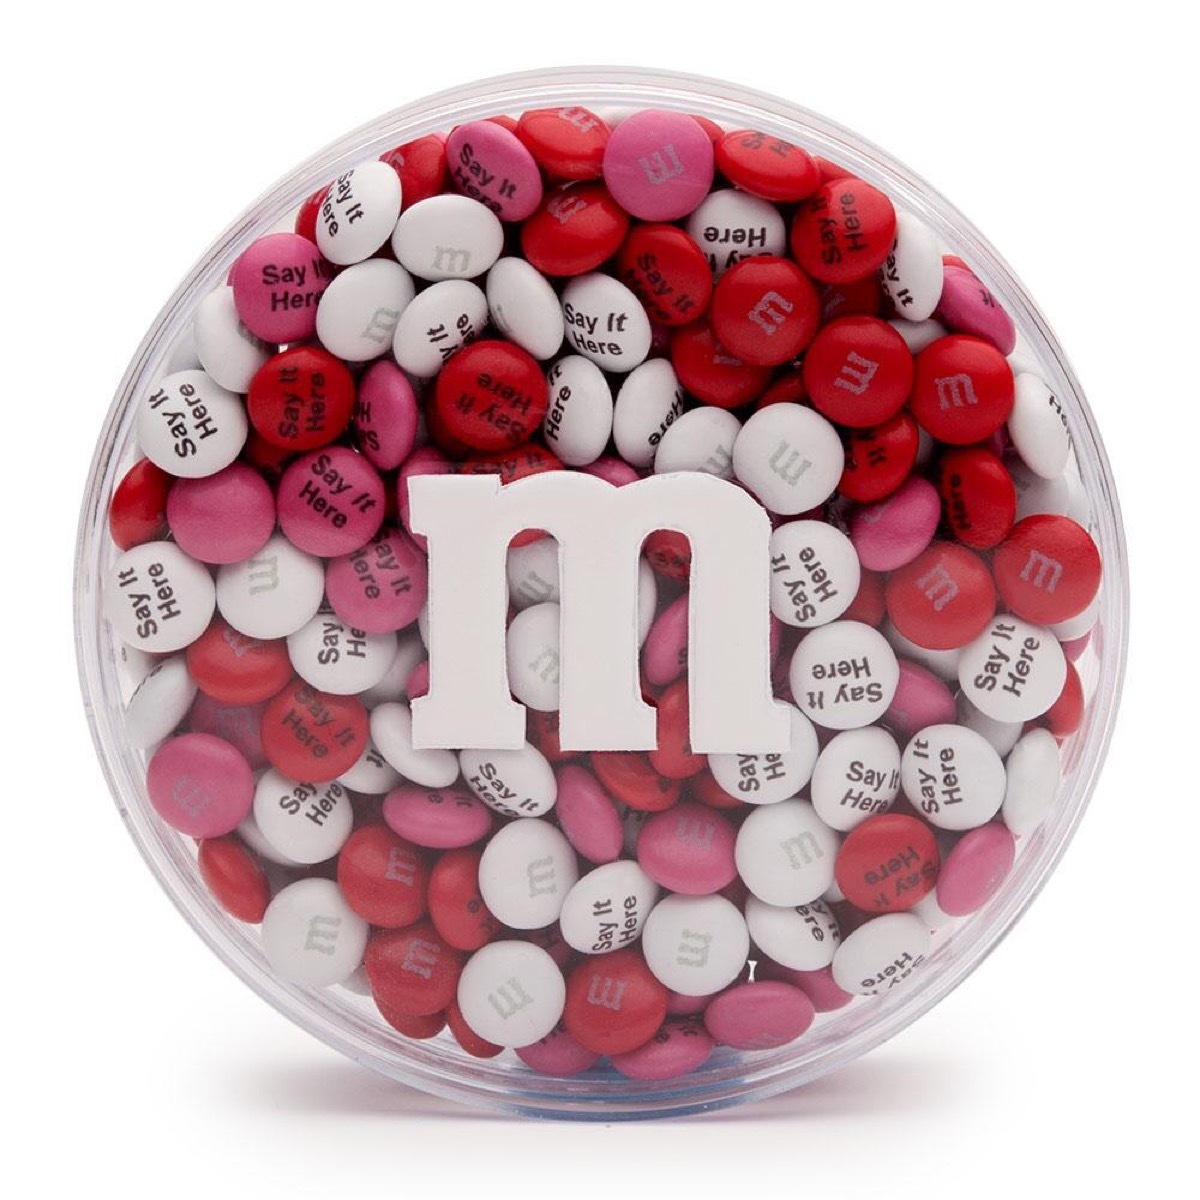 Personalized M&Ms {Christmas Gift Ideas}